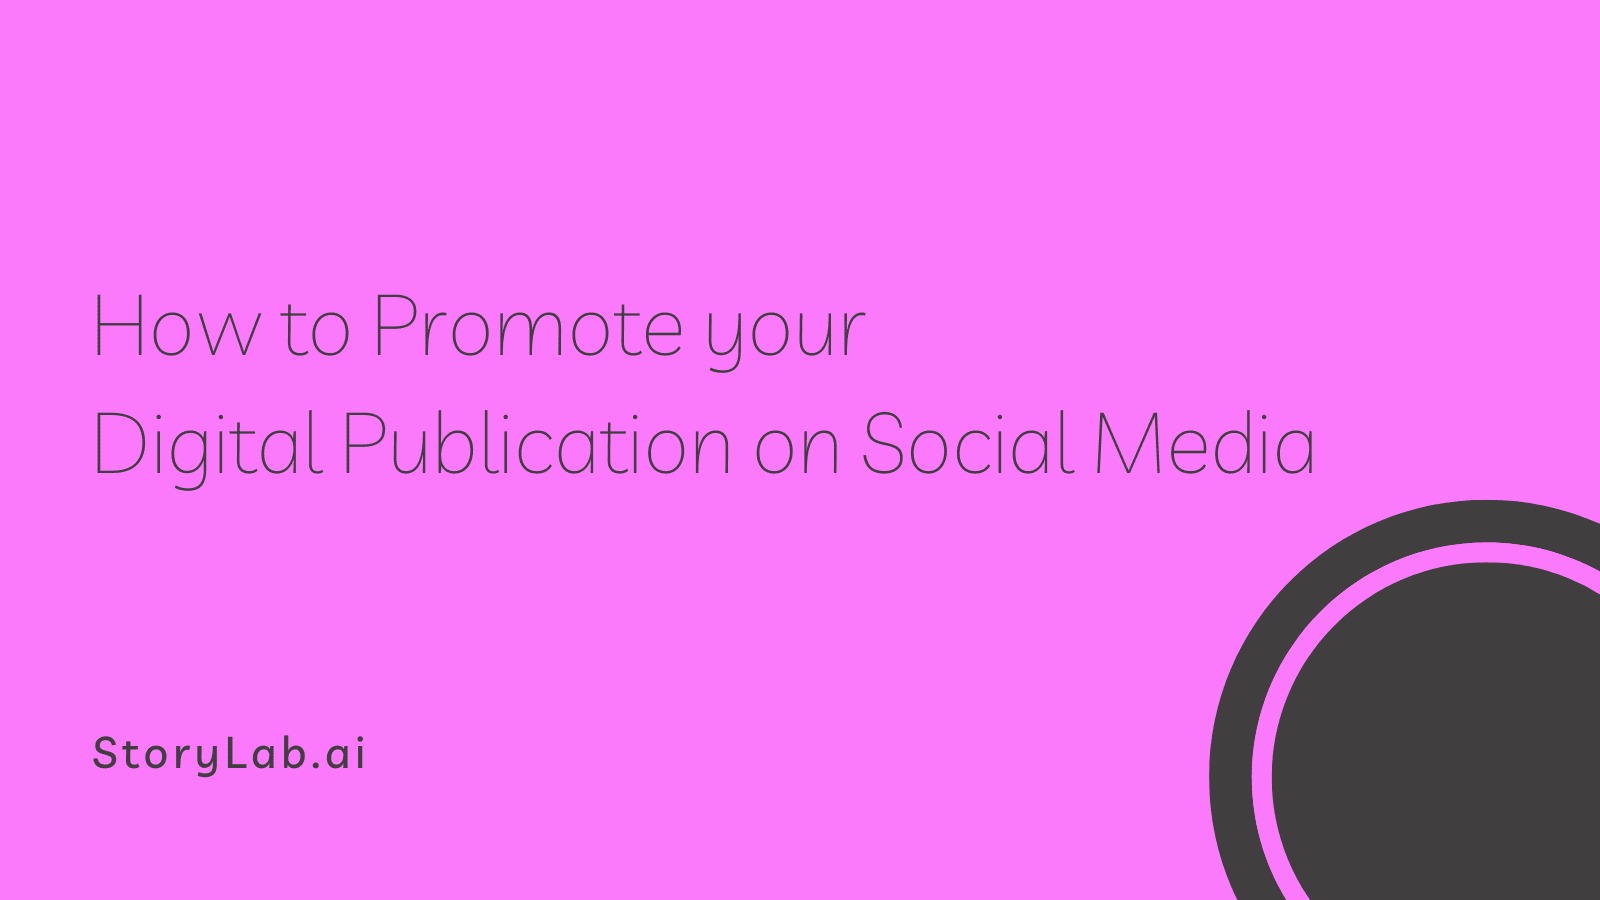 How to Promote your Digital Publication on Social Media